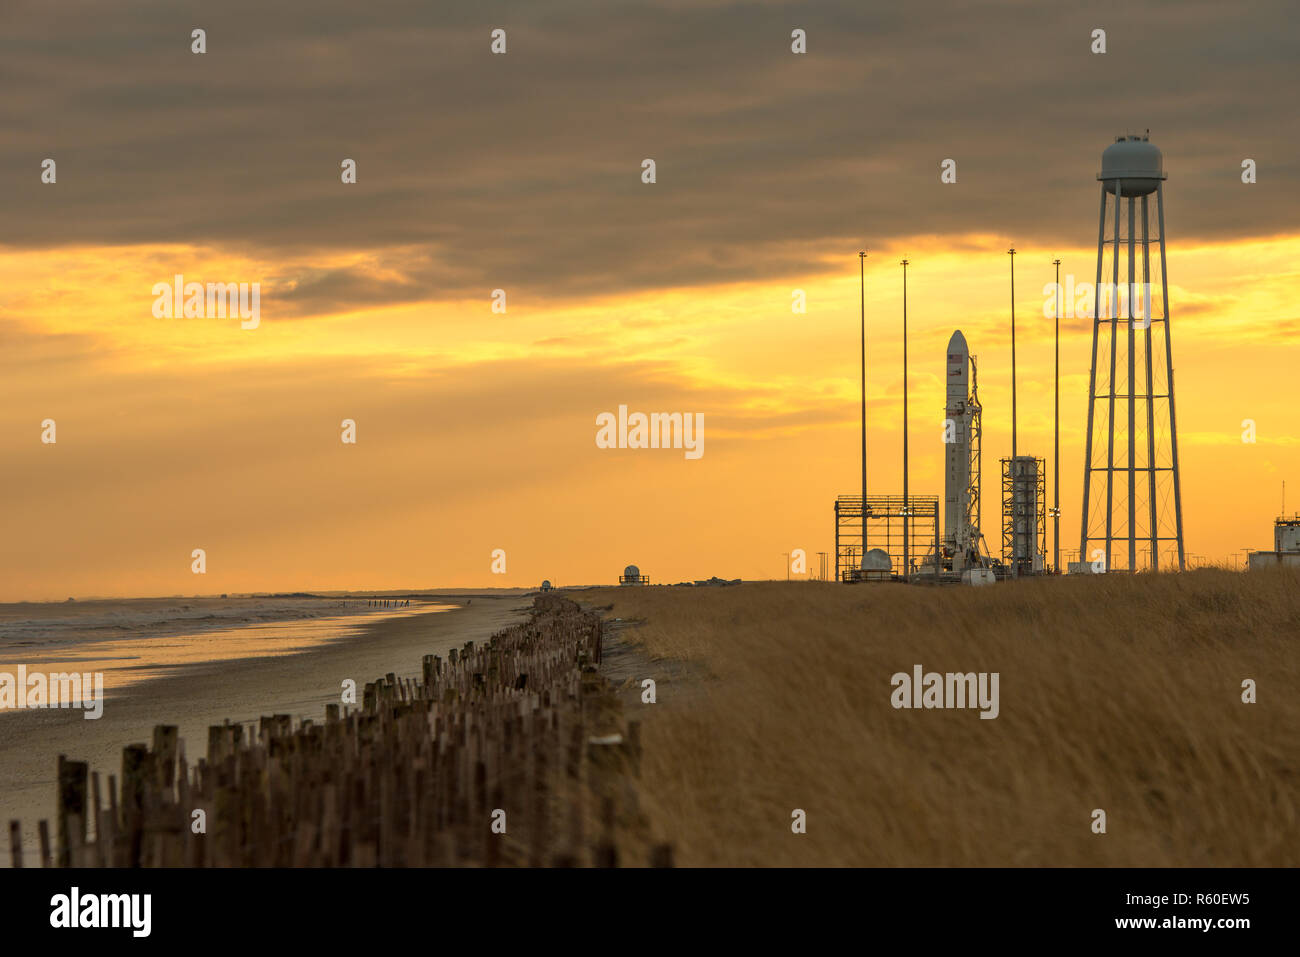 An Orbital Sciences Corporation Antares rocket is seen on launch Pad-0A at NASA's Wallops Flight Facility, Monday, January 6, 2014 in advance of a pla Stock Photo